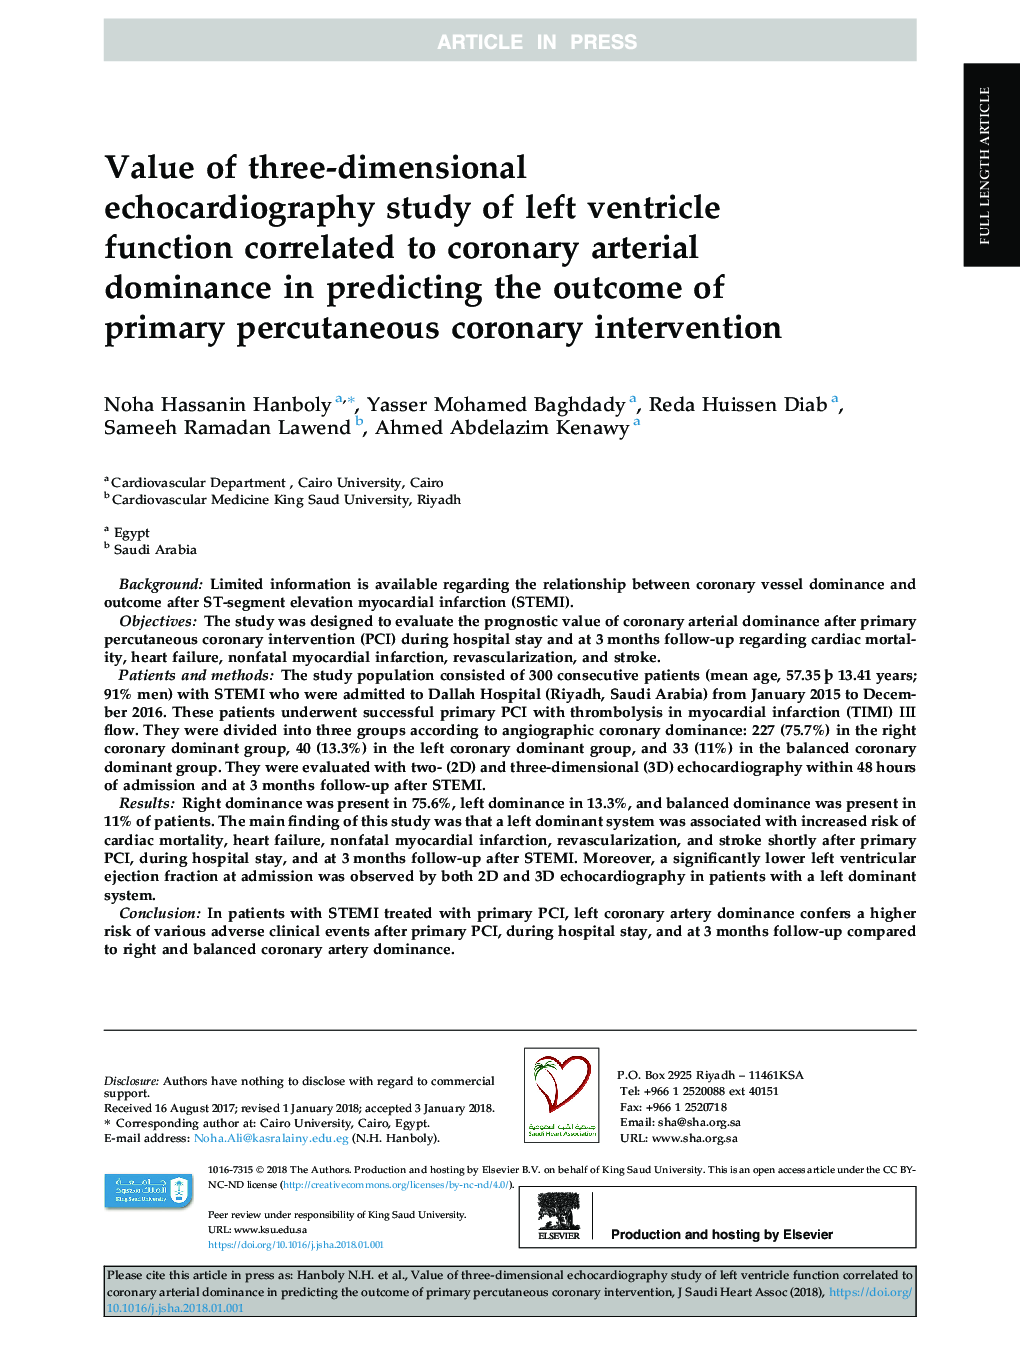 Value of three-dimensional echocardiography study of left ventricle function correlated to coronary arterial dominance in predicting the outcome of primary percutaneous coronary intervention